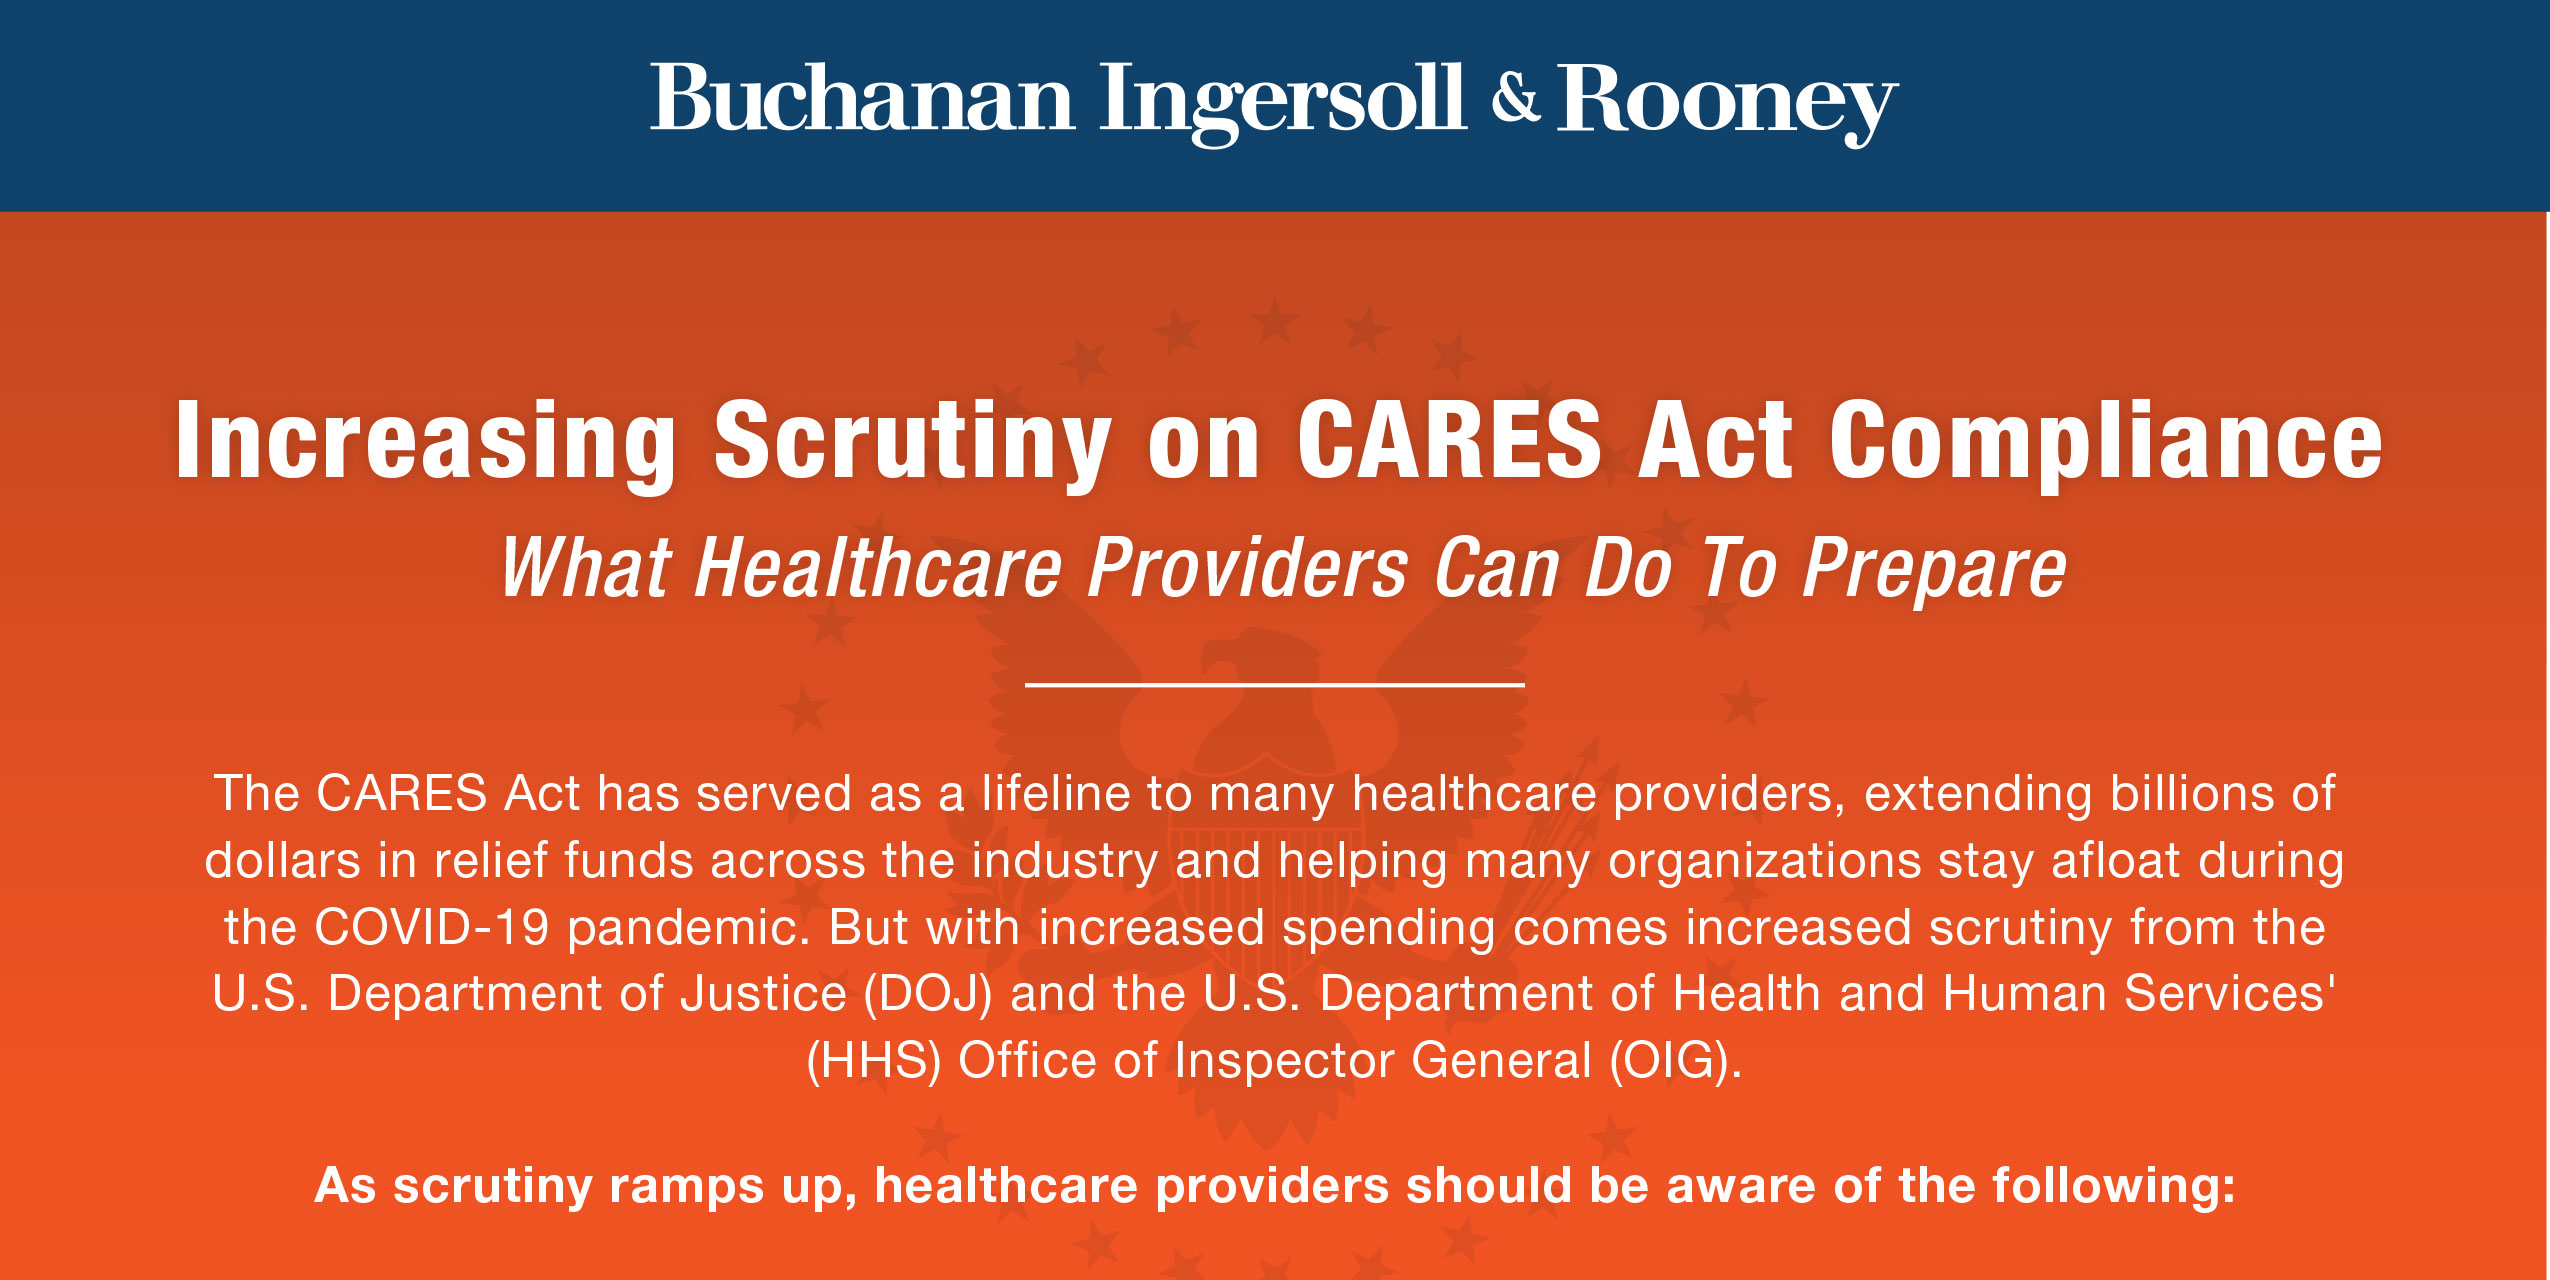 Increasing Scrutiny on CARES Act Compliance
What Healthcare Providers Can Do To Prepare

The CARES Act has served as a lifeline to many healthcare providers, extending billions of dollars in relief funds across the industry and helping many organizations stay afloat during the COVID-19 pandemic. But with increased spending comes increased scrutiny from the U.S. Department of Justice (DOJ) and the U.S. Department of Health and Human Services' (HHS) Office of Inspector General (OIG).

As scrutiny ramps up, healthcare providers should be aware of the following: 